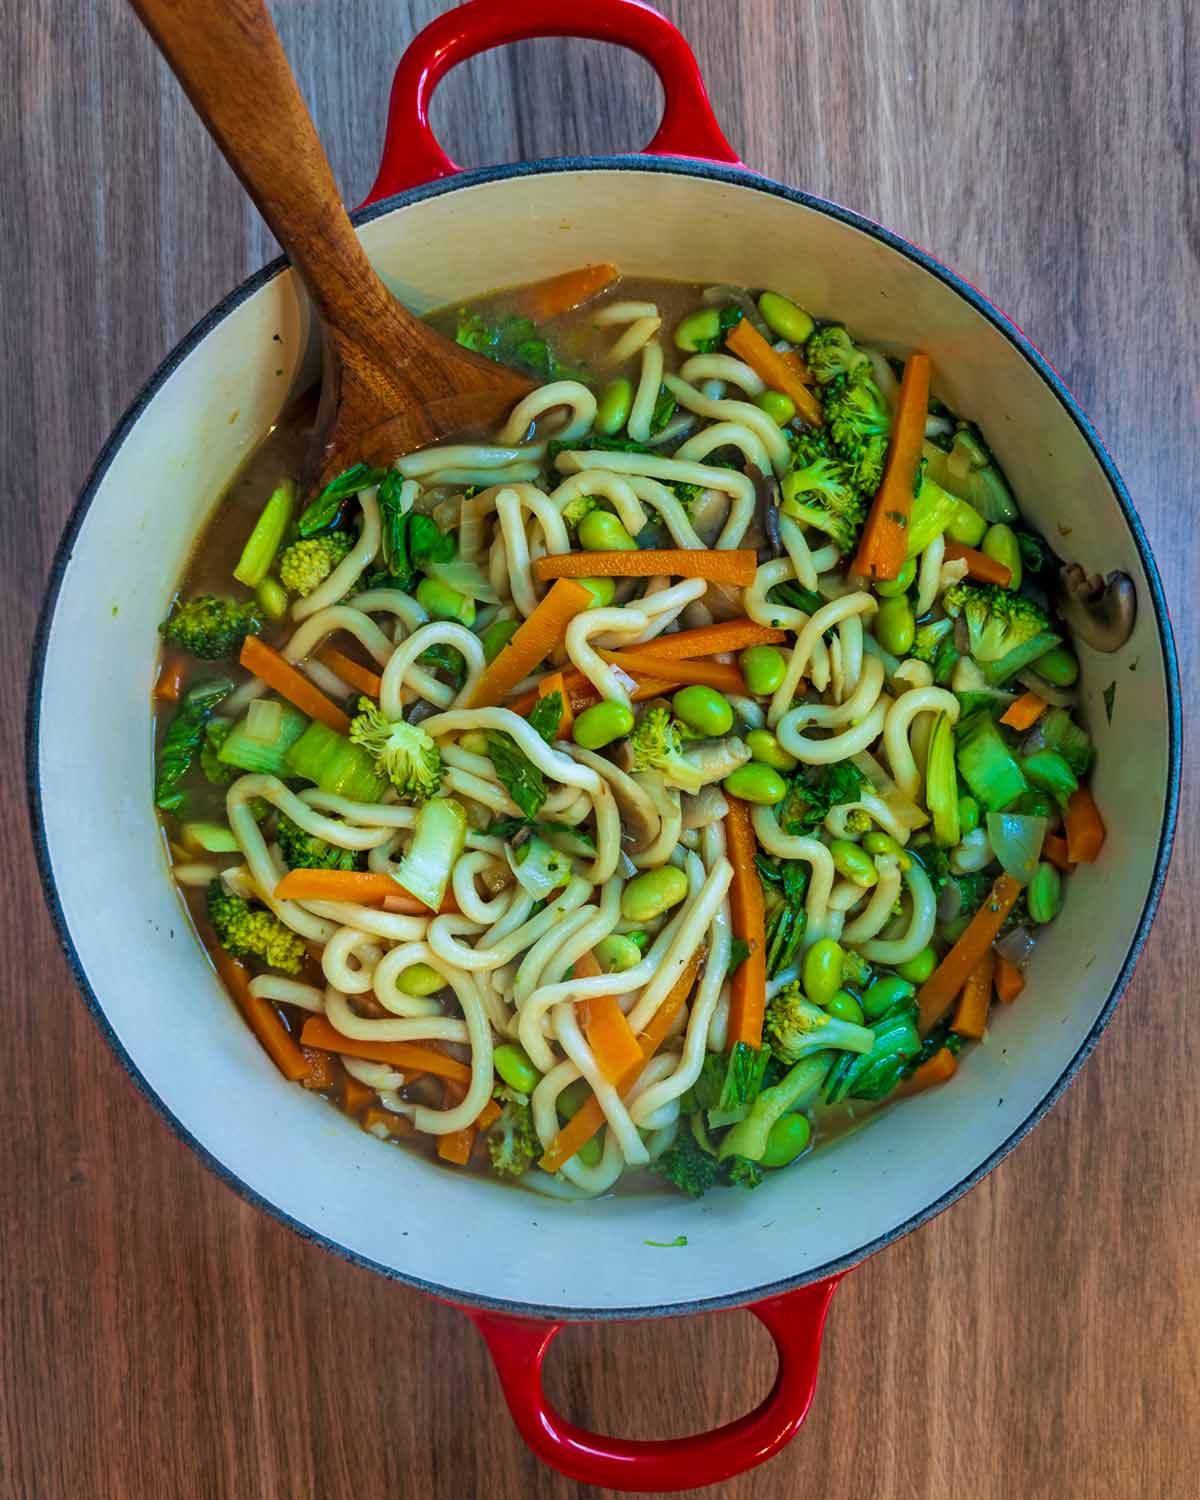 Udon noodles added to the pan.